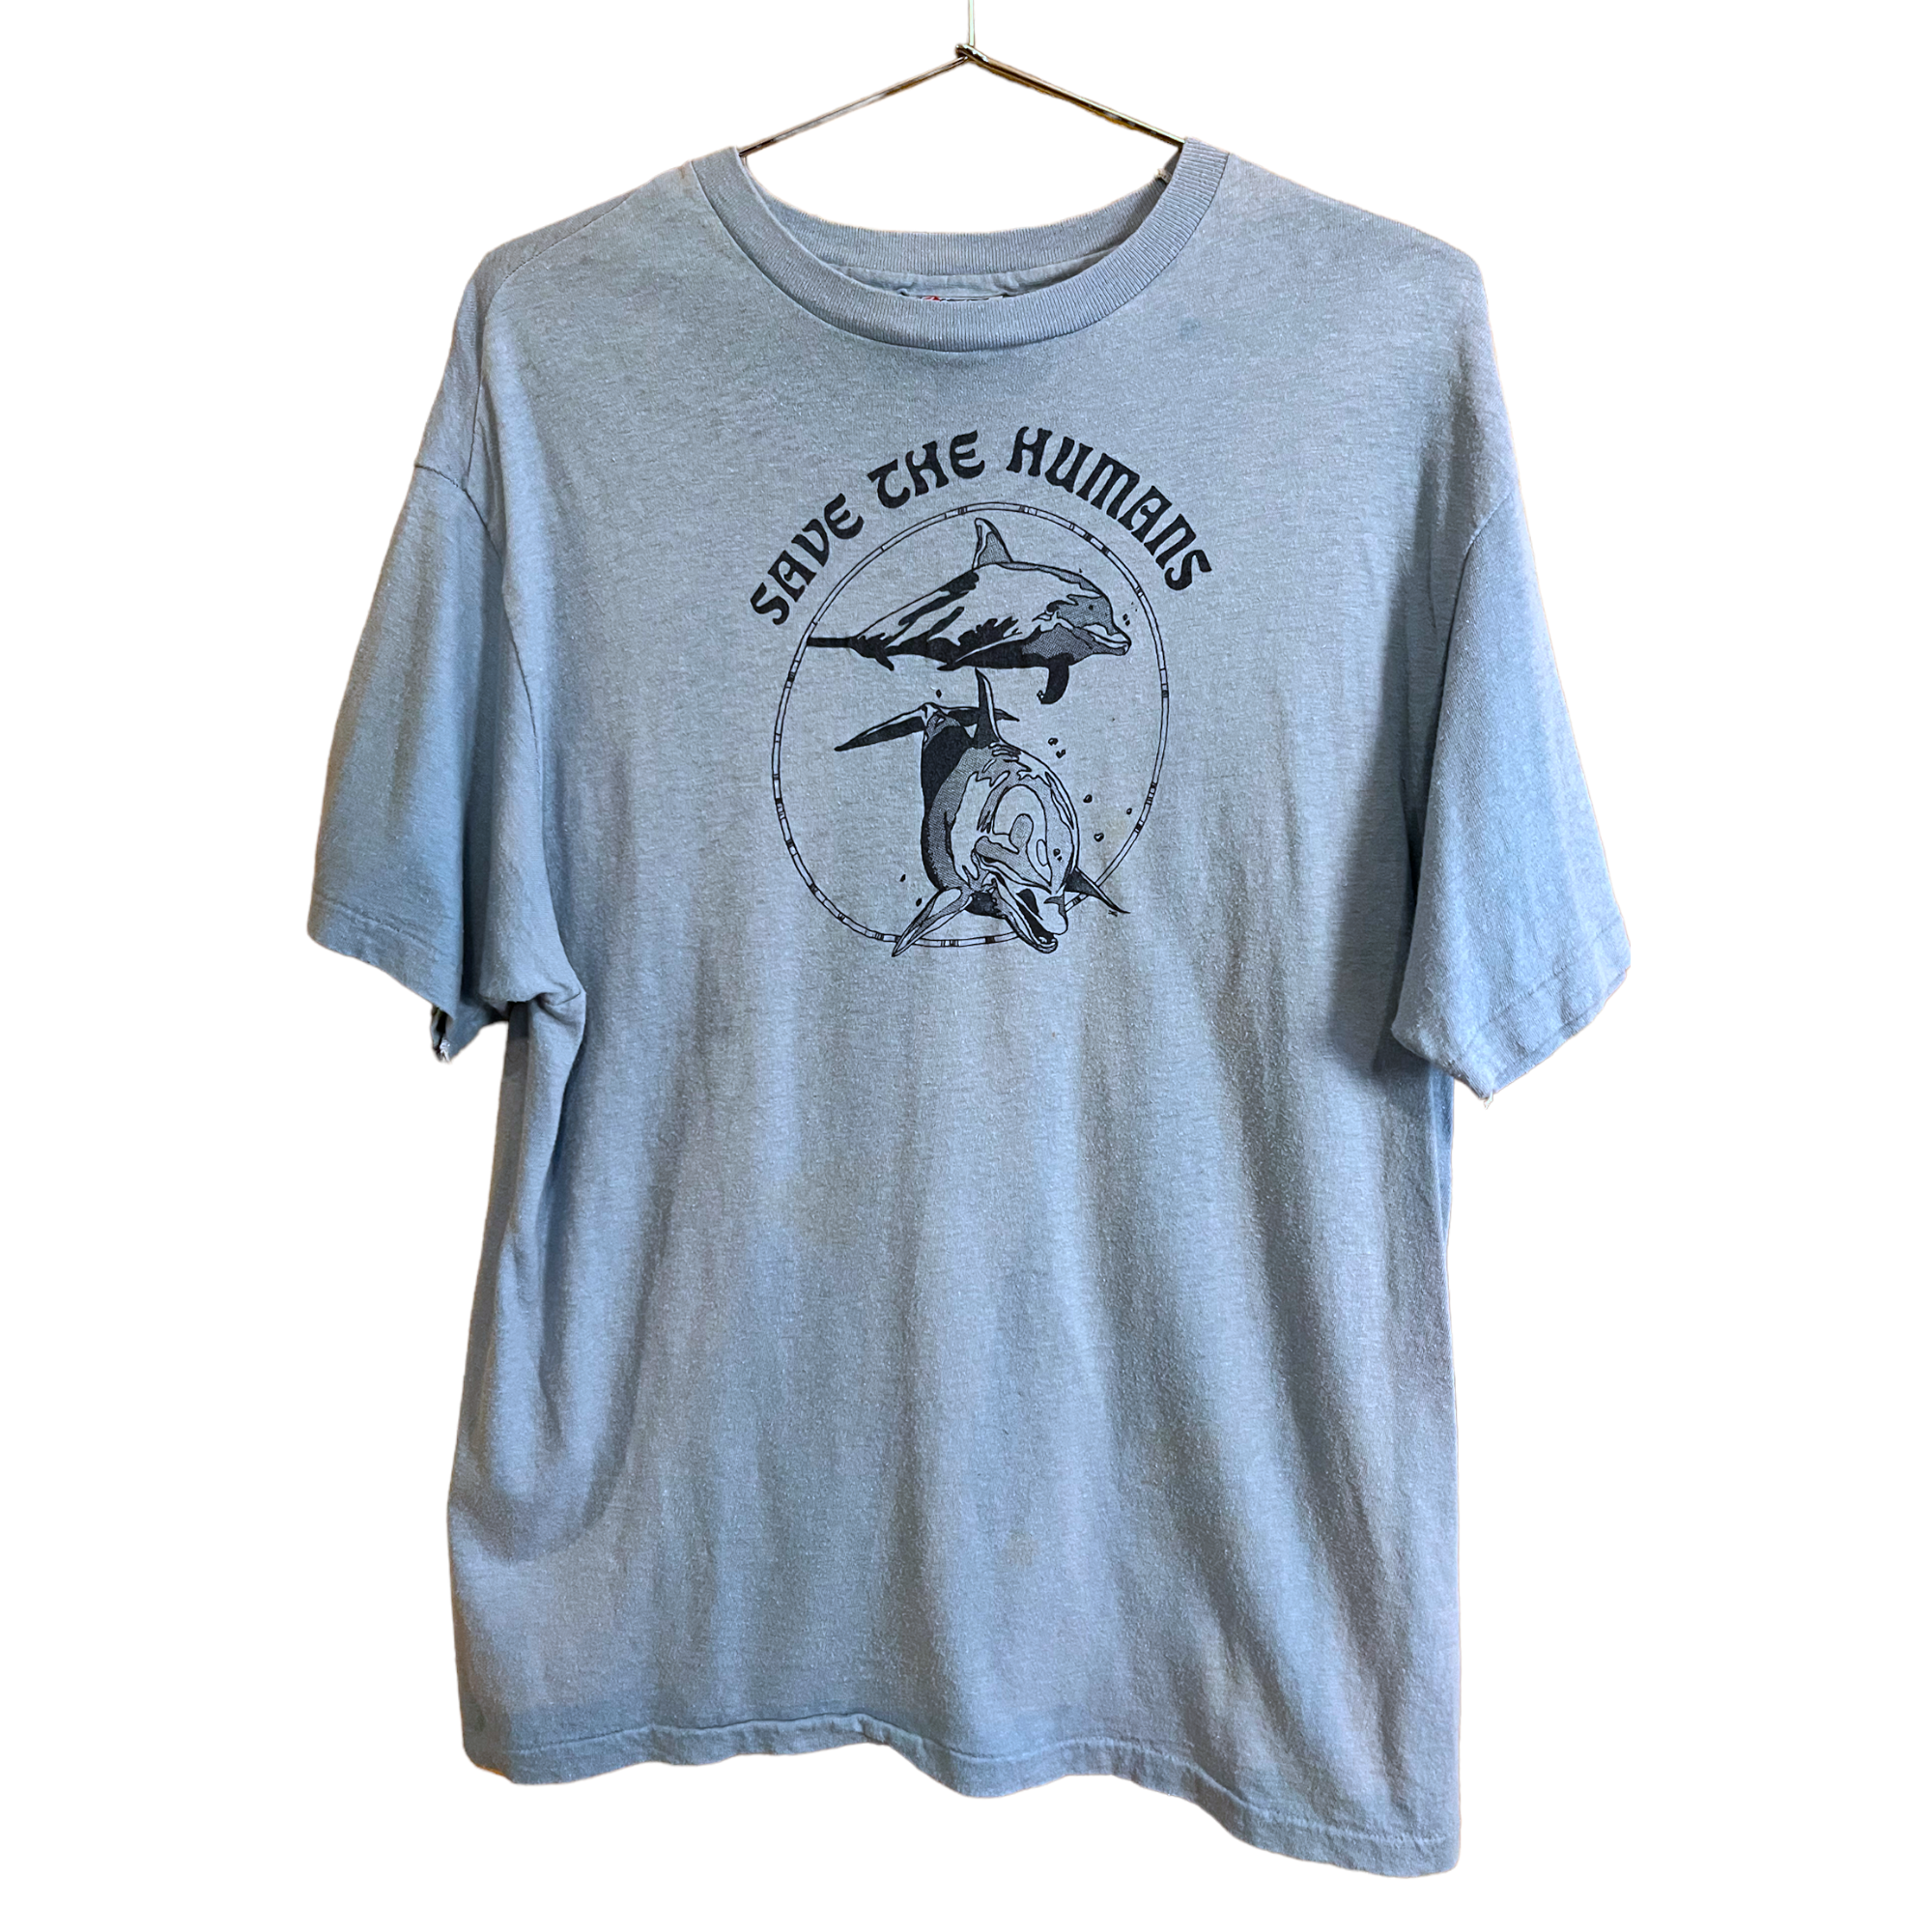 80s Save the Humans Dolphin T-Shirt - Baby Blue - L/XL